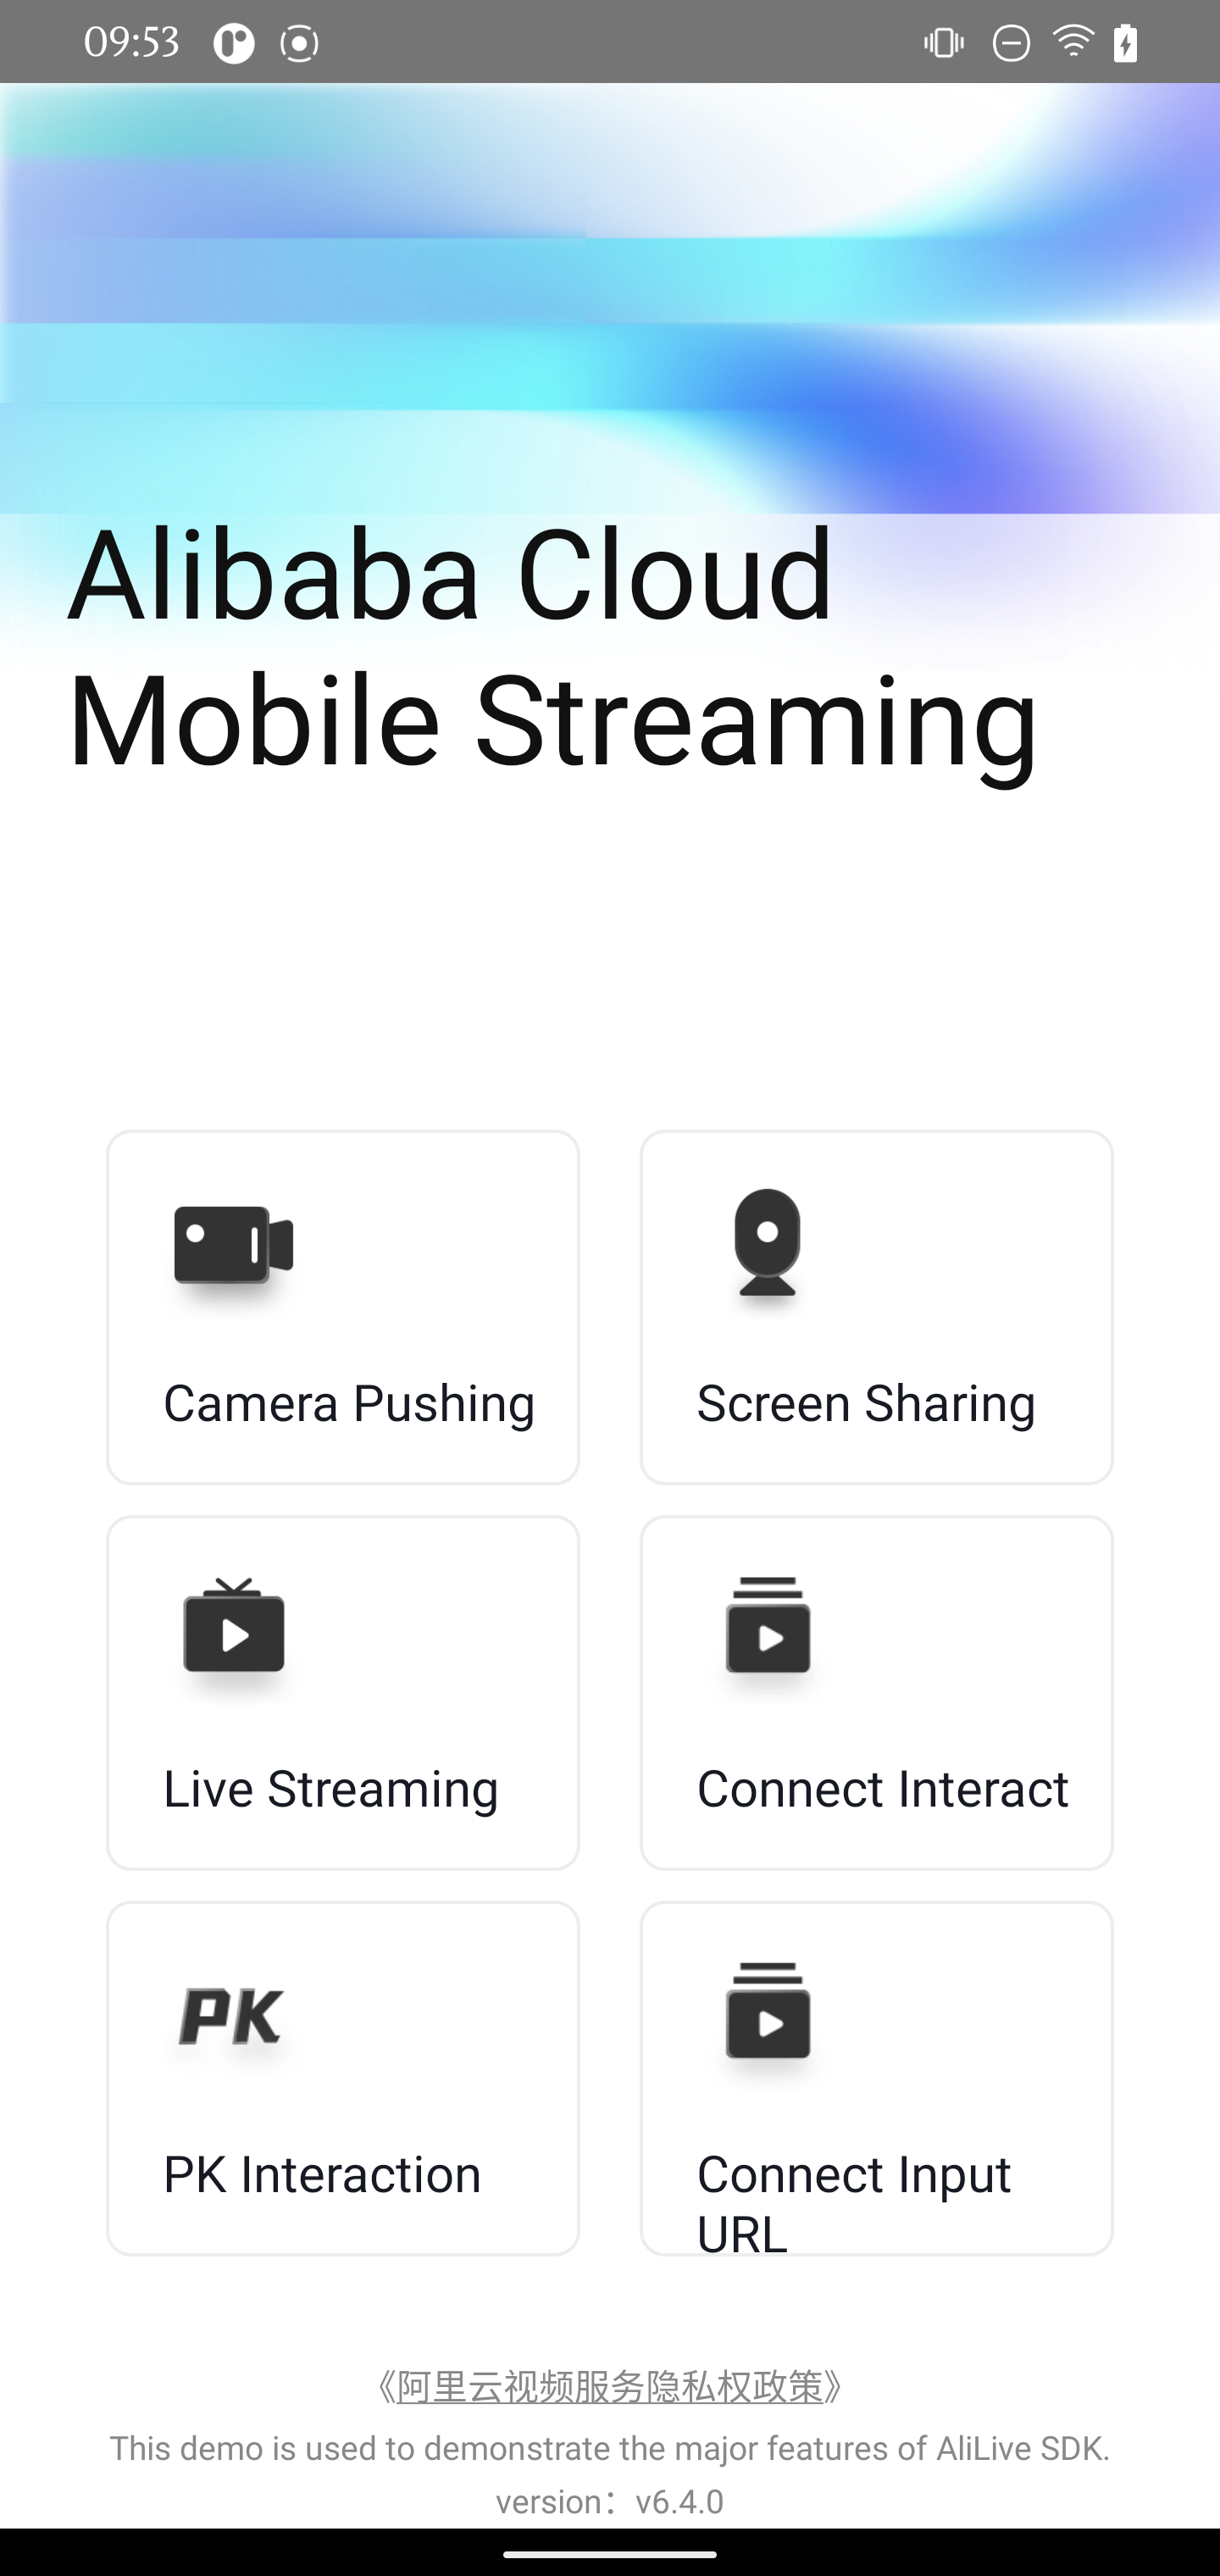 Homepage of the mobile app for stream ingest